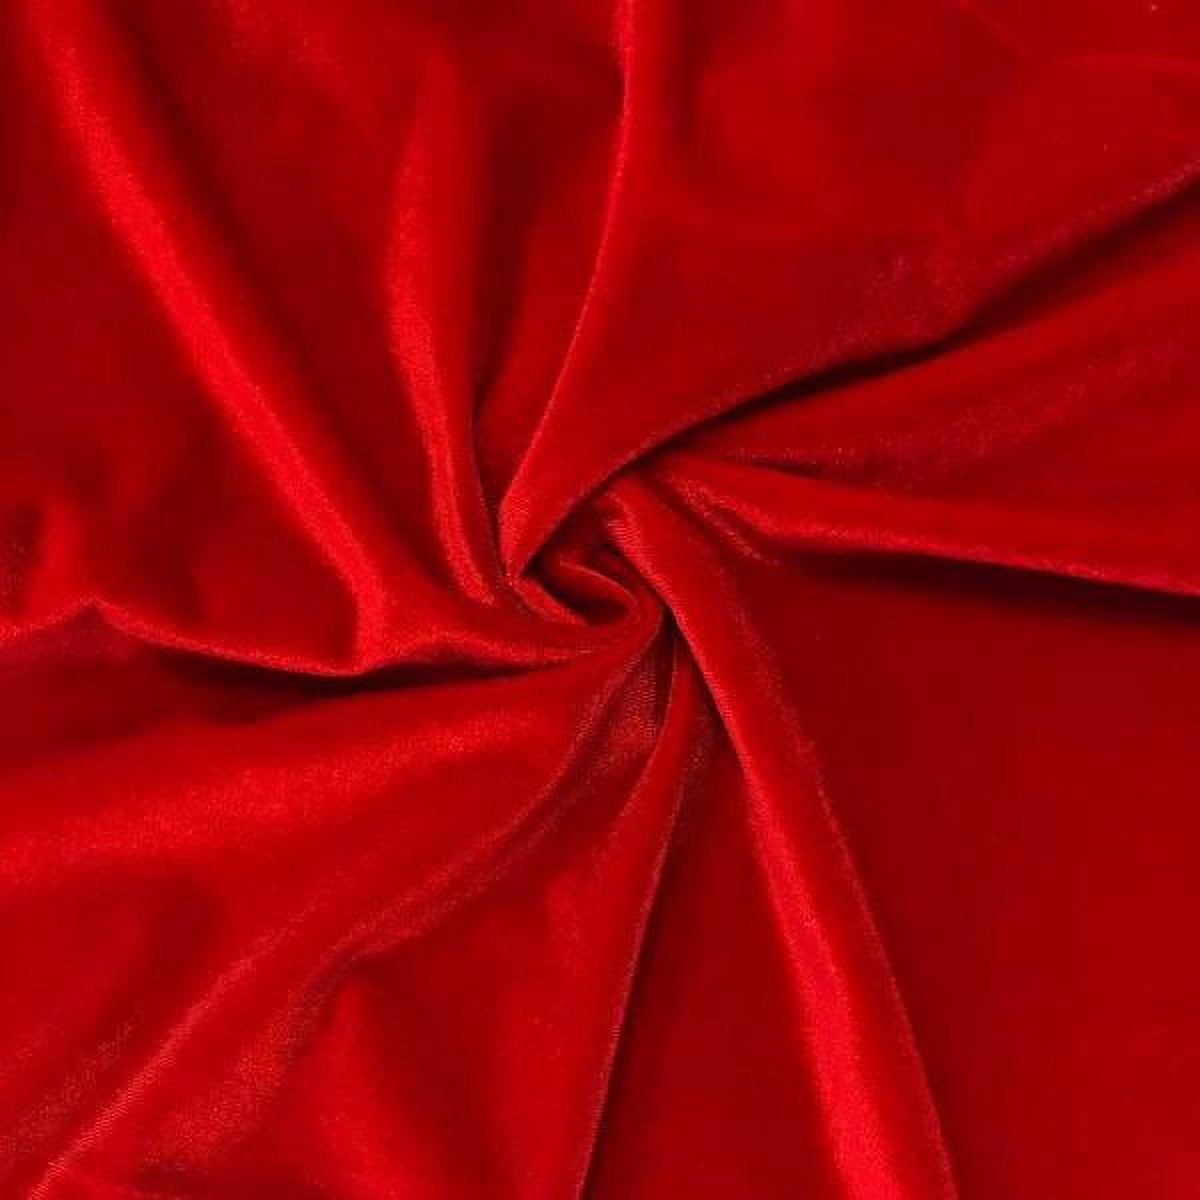 Polyester Spandex Blend Fabric Buyers - Wholesale Manufacturers, Importers,  Distributors and Dealers for Polyester Spandex Blend Fabric - Fibre2Fashion  - 19165969